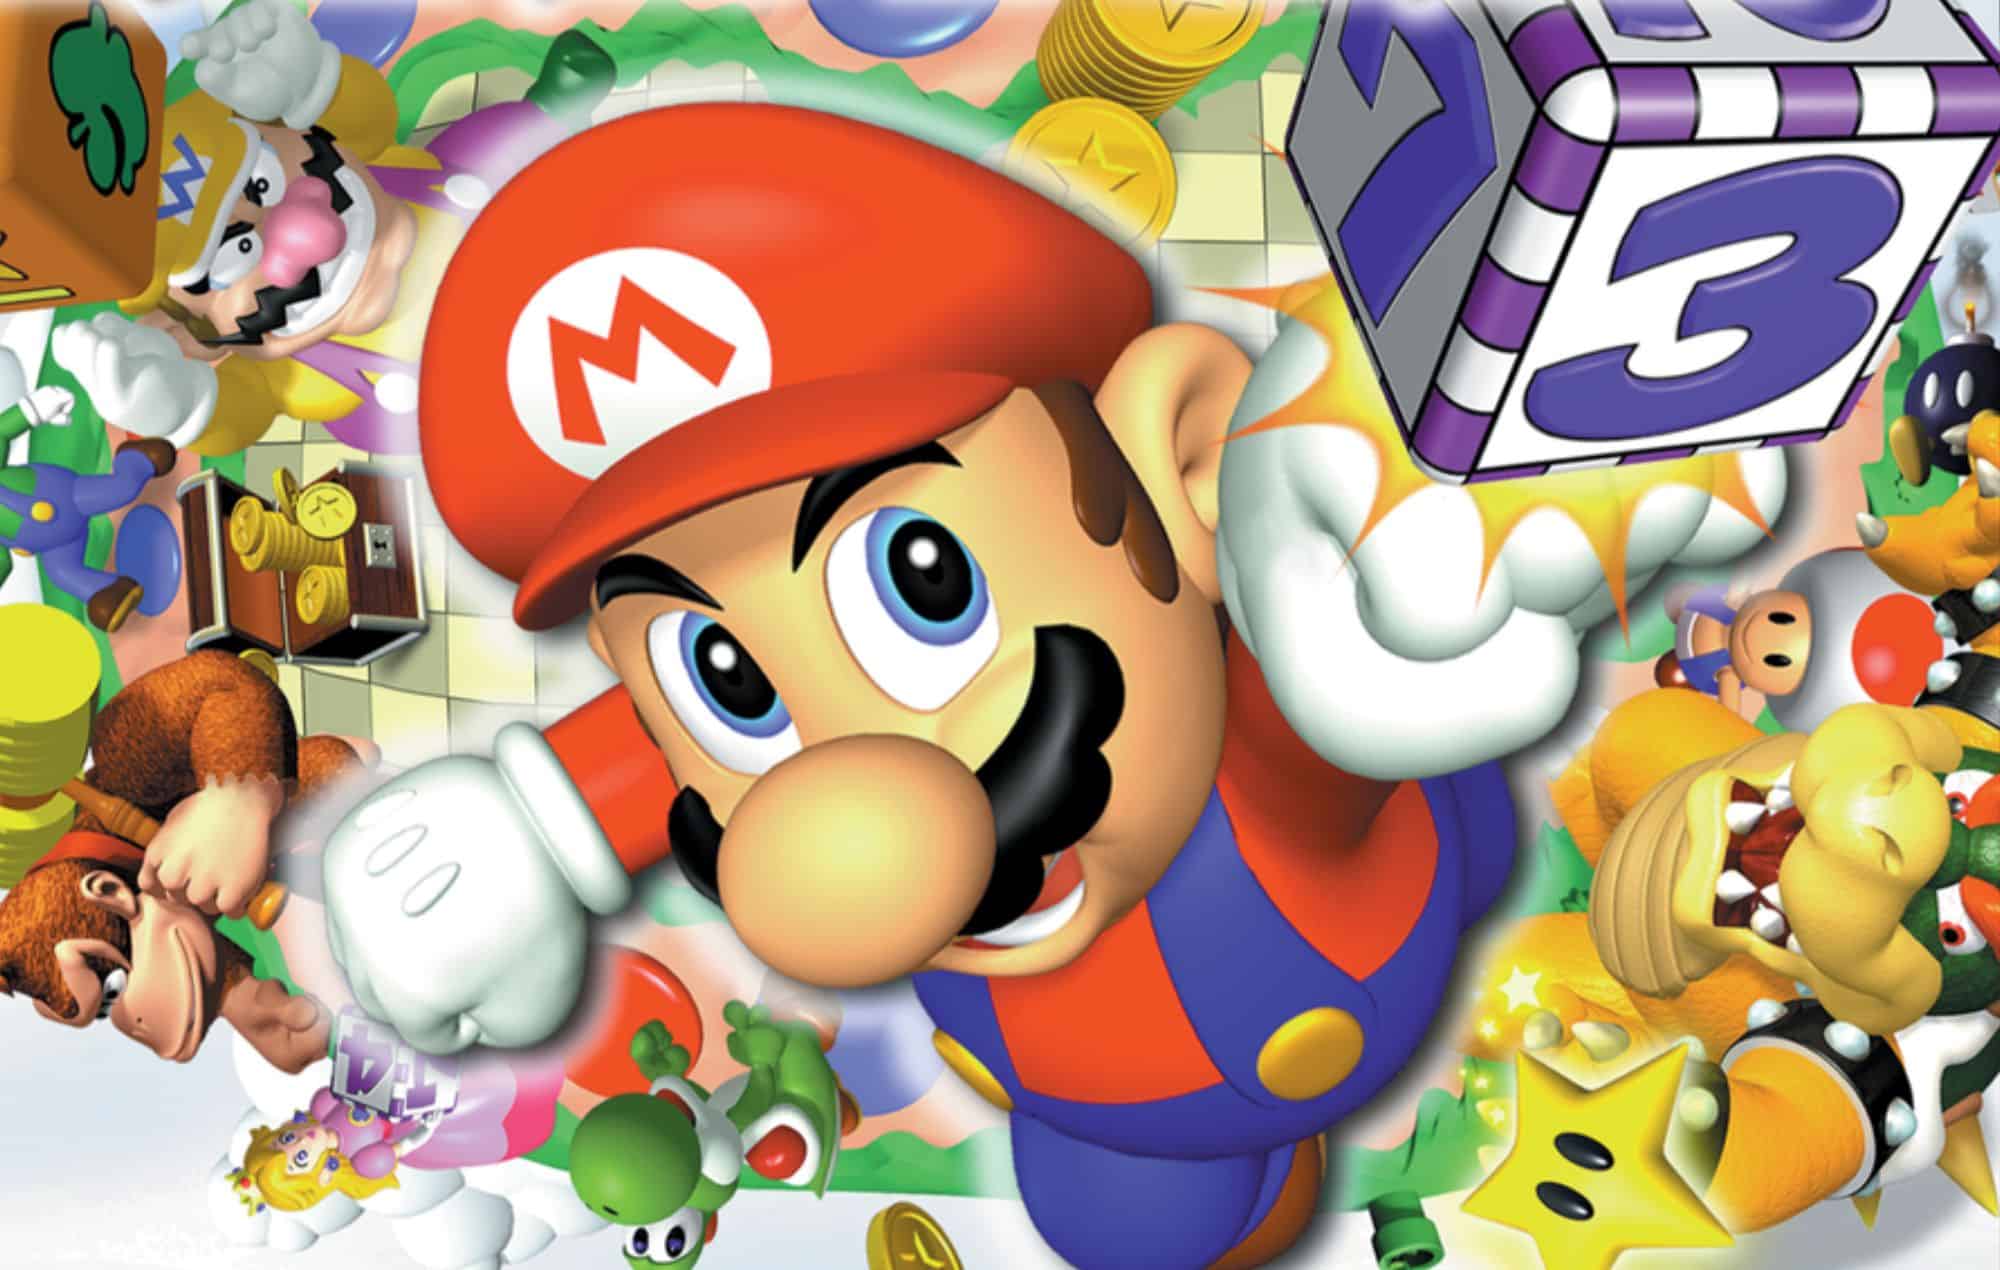 Games Inbox: Nintendo Switch Online worth it for the retro games?